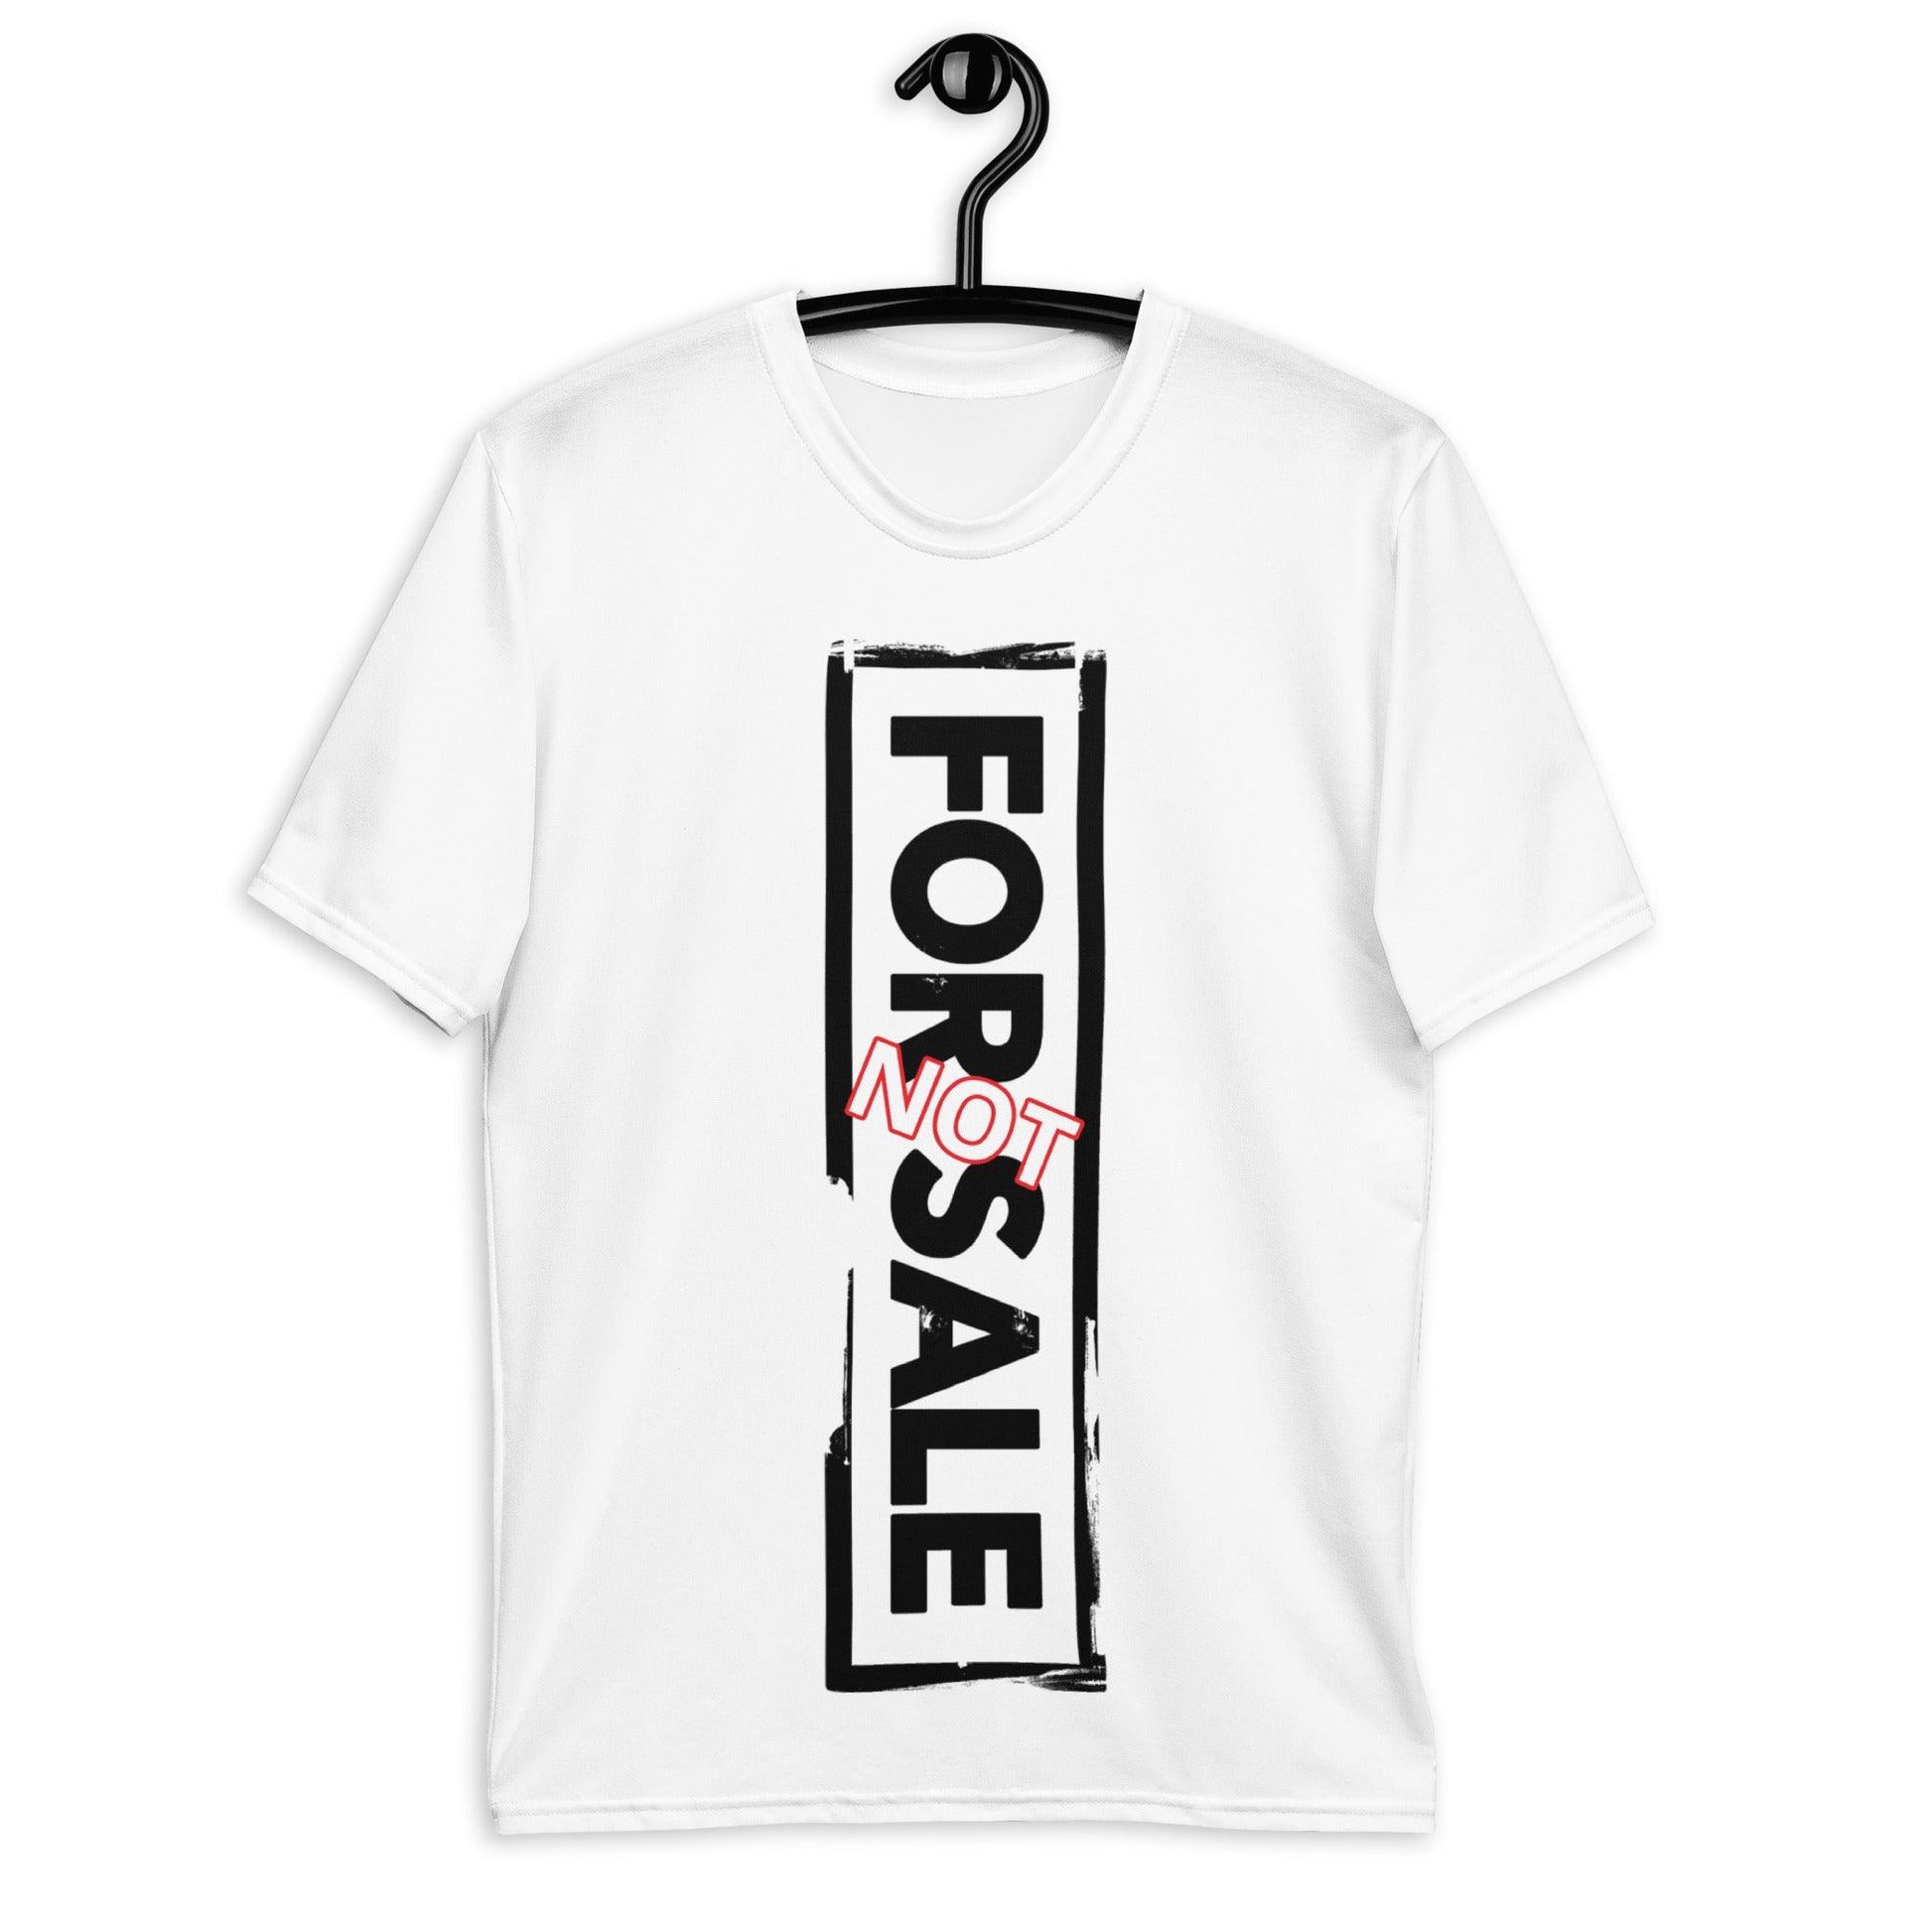 Not For Sale Black Stamp - Mens T-Shirt - iSAW Company